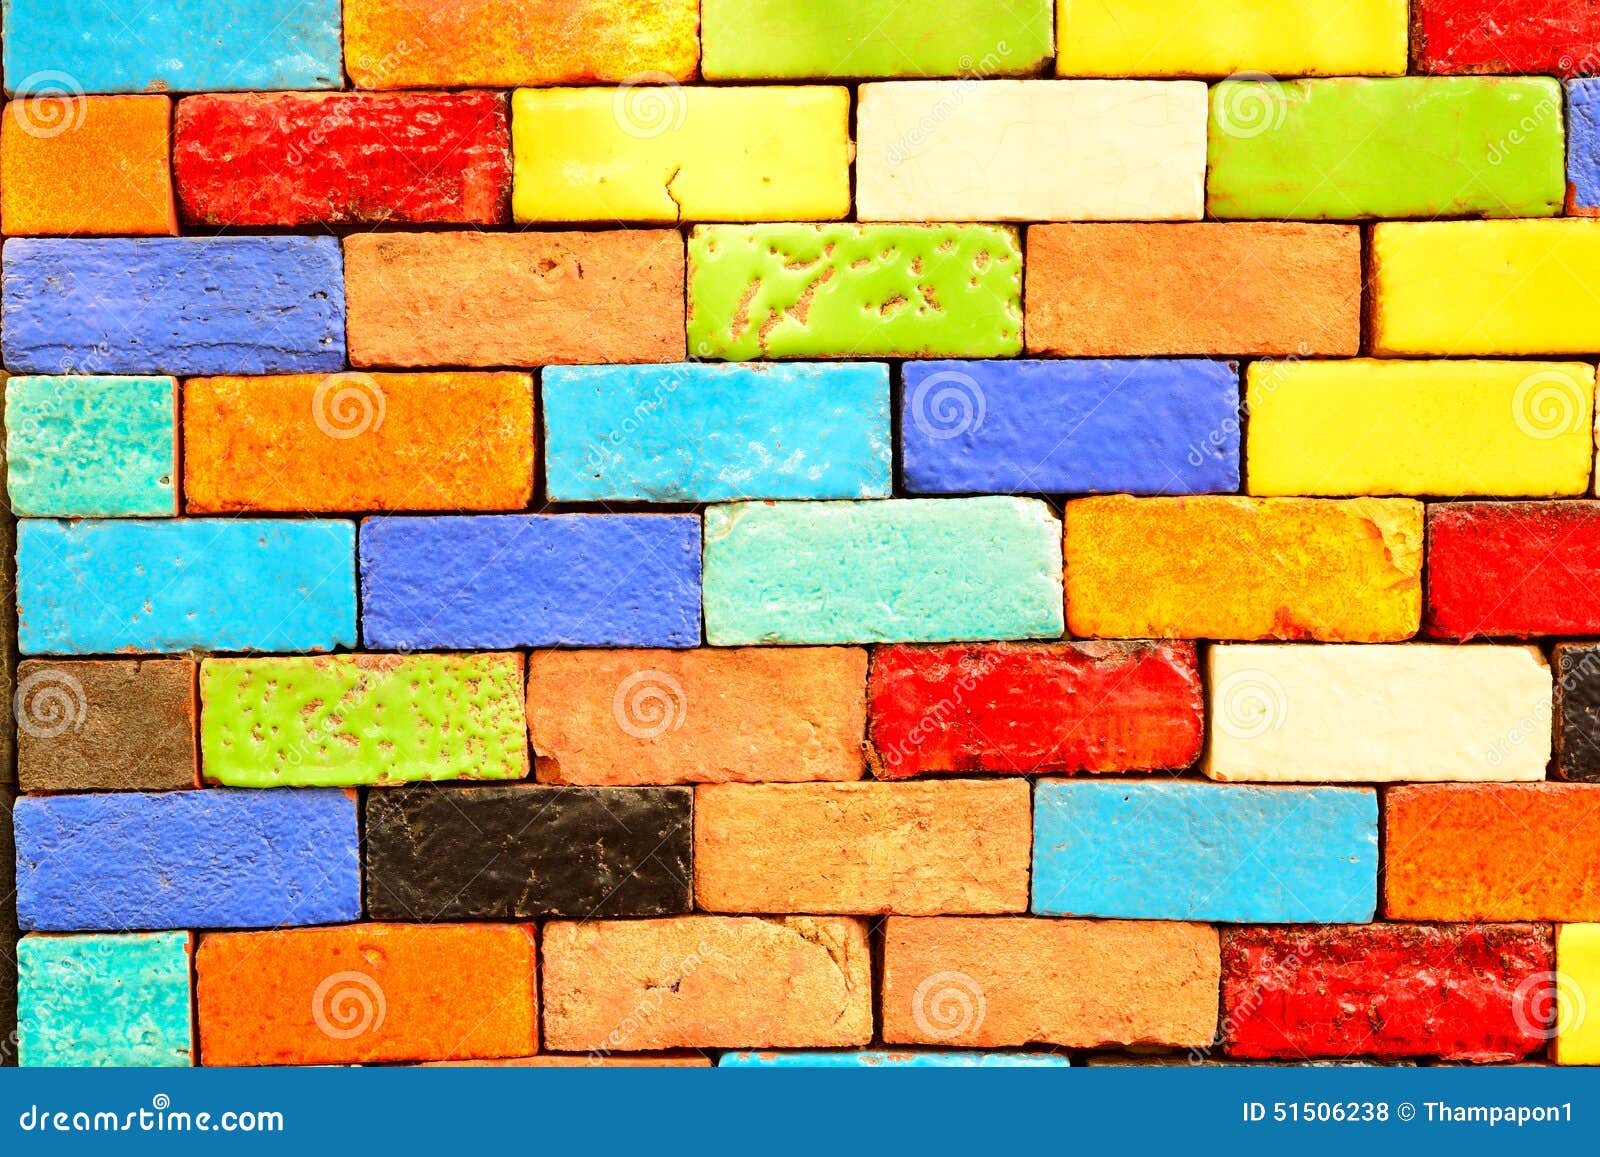 Colorful Ceramic Tile Patterns Background. Stock Photo - Image of ...